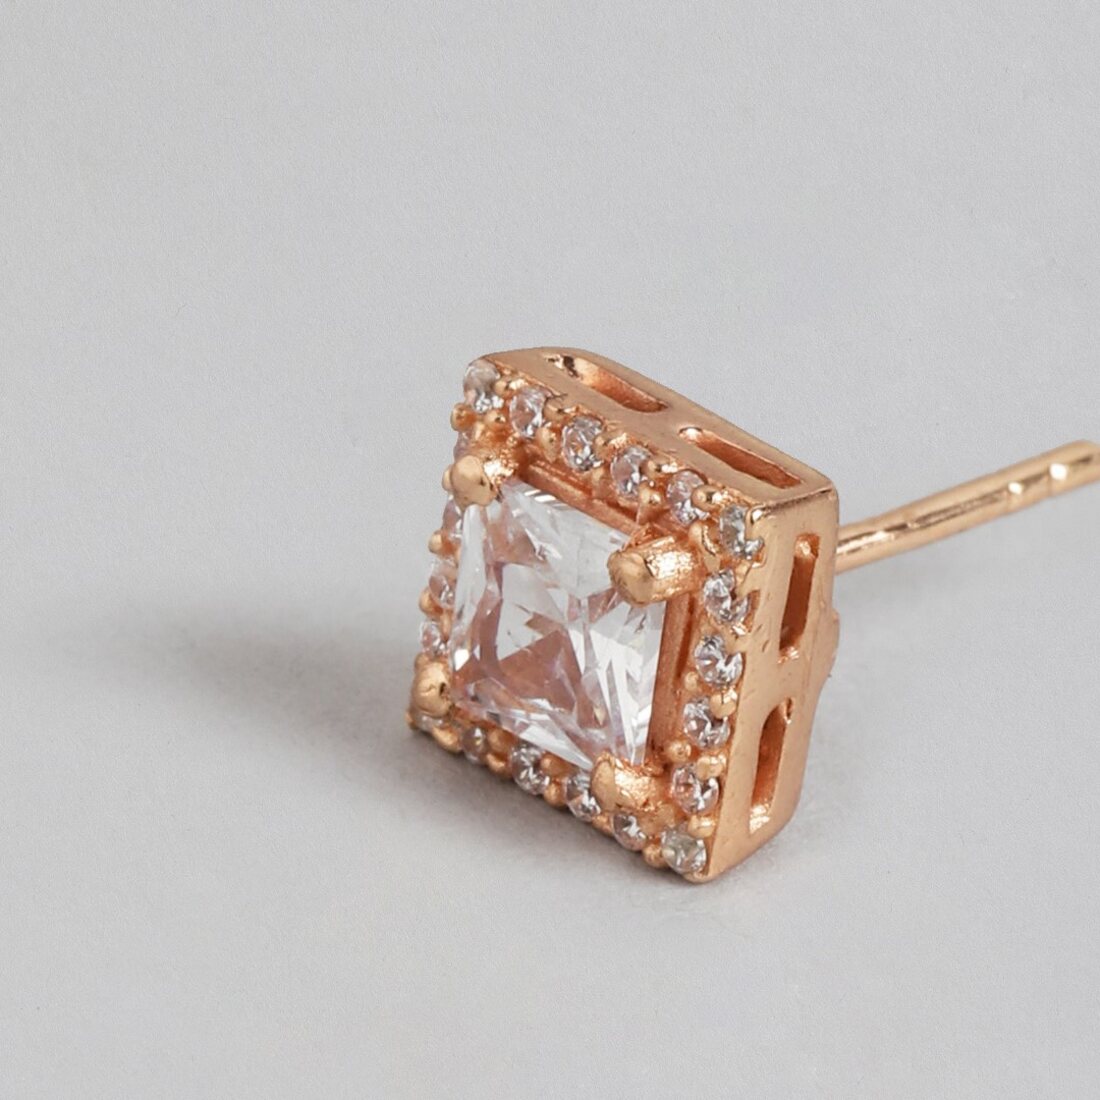 Rose Gold Sparkle 925 Sterling Silver CZ Stud Square Earrings